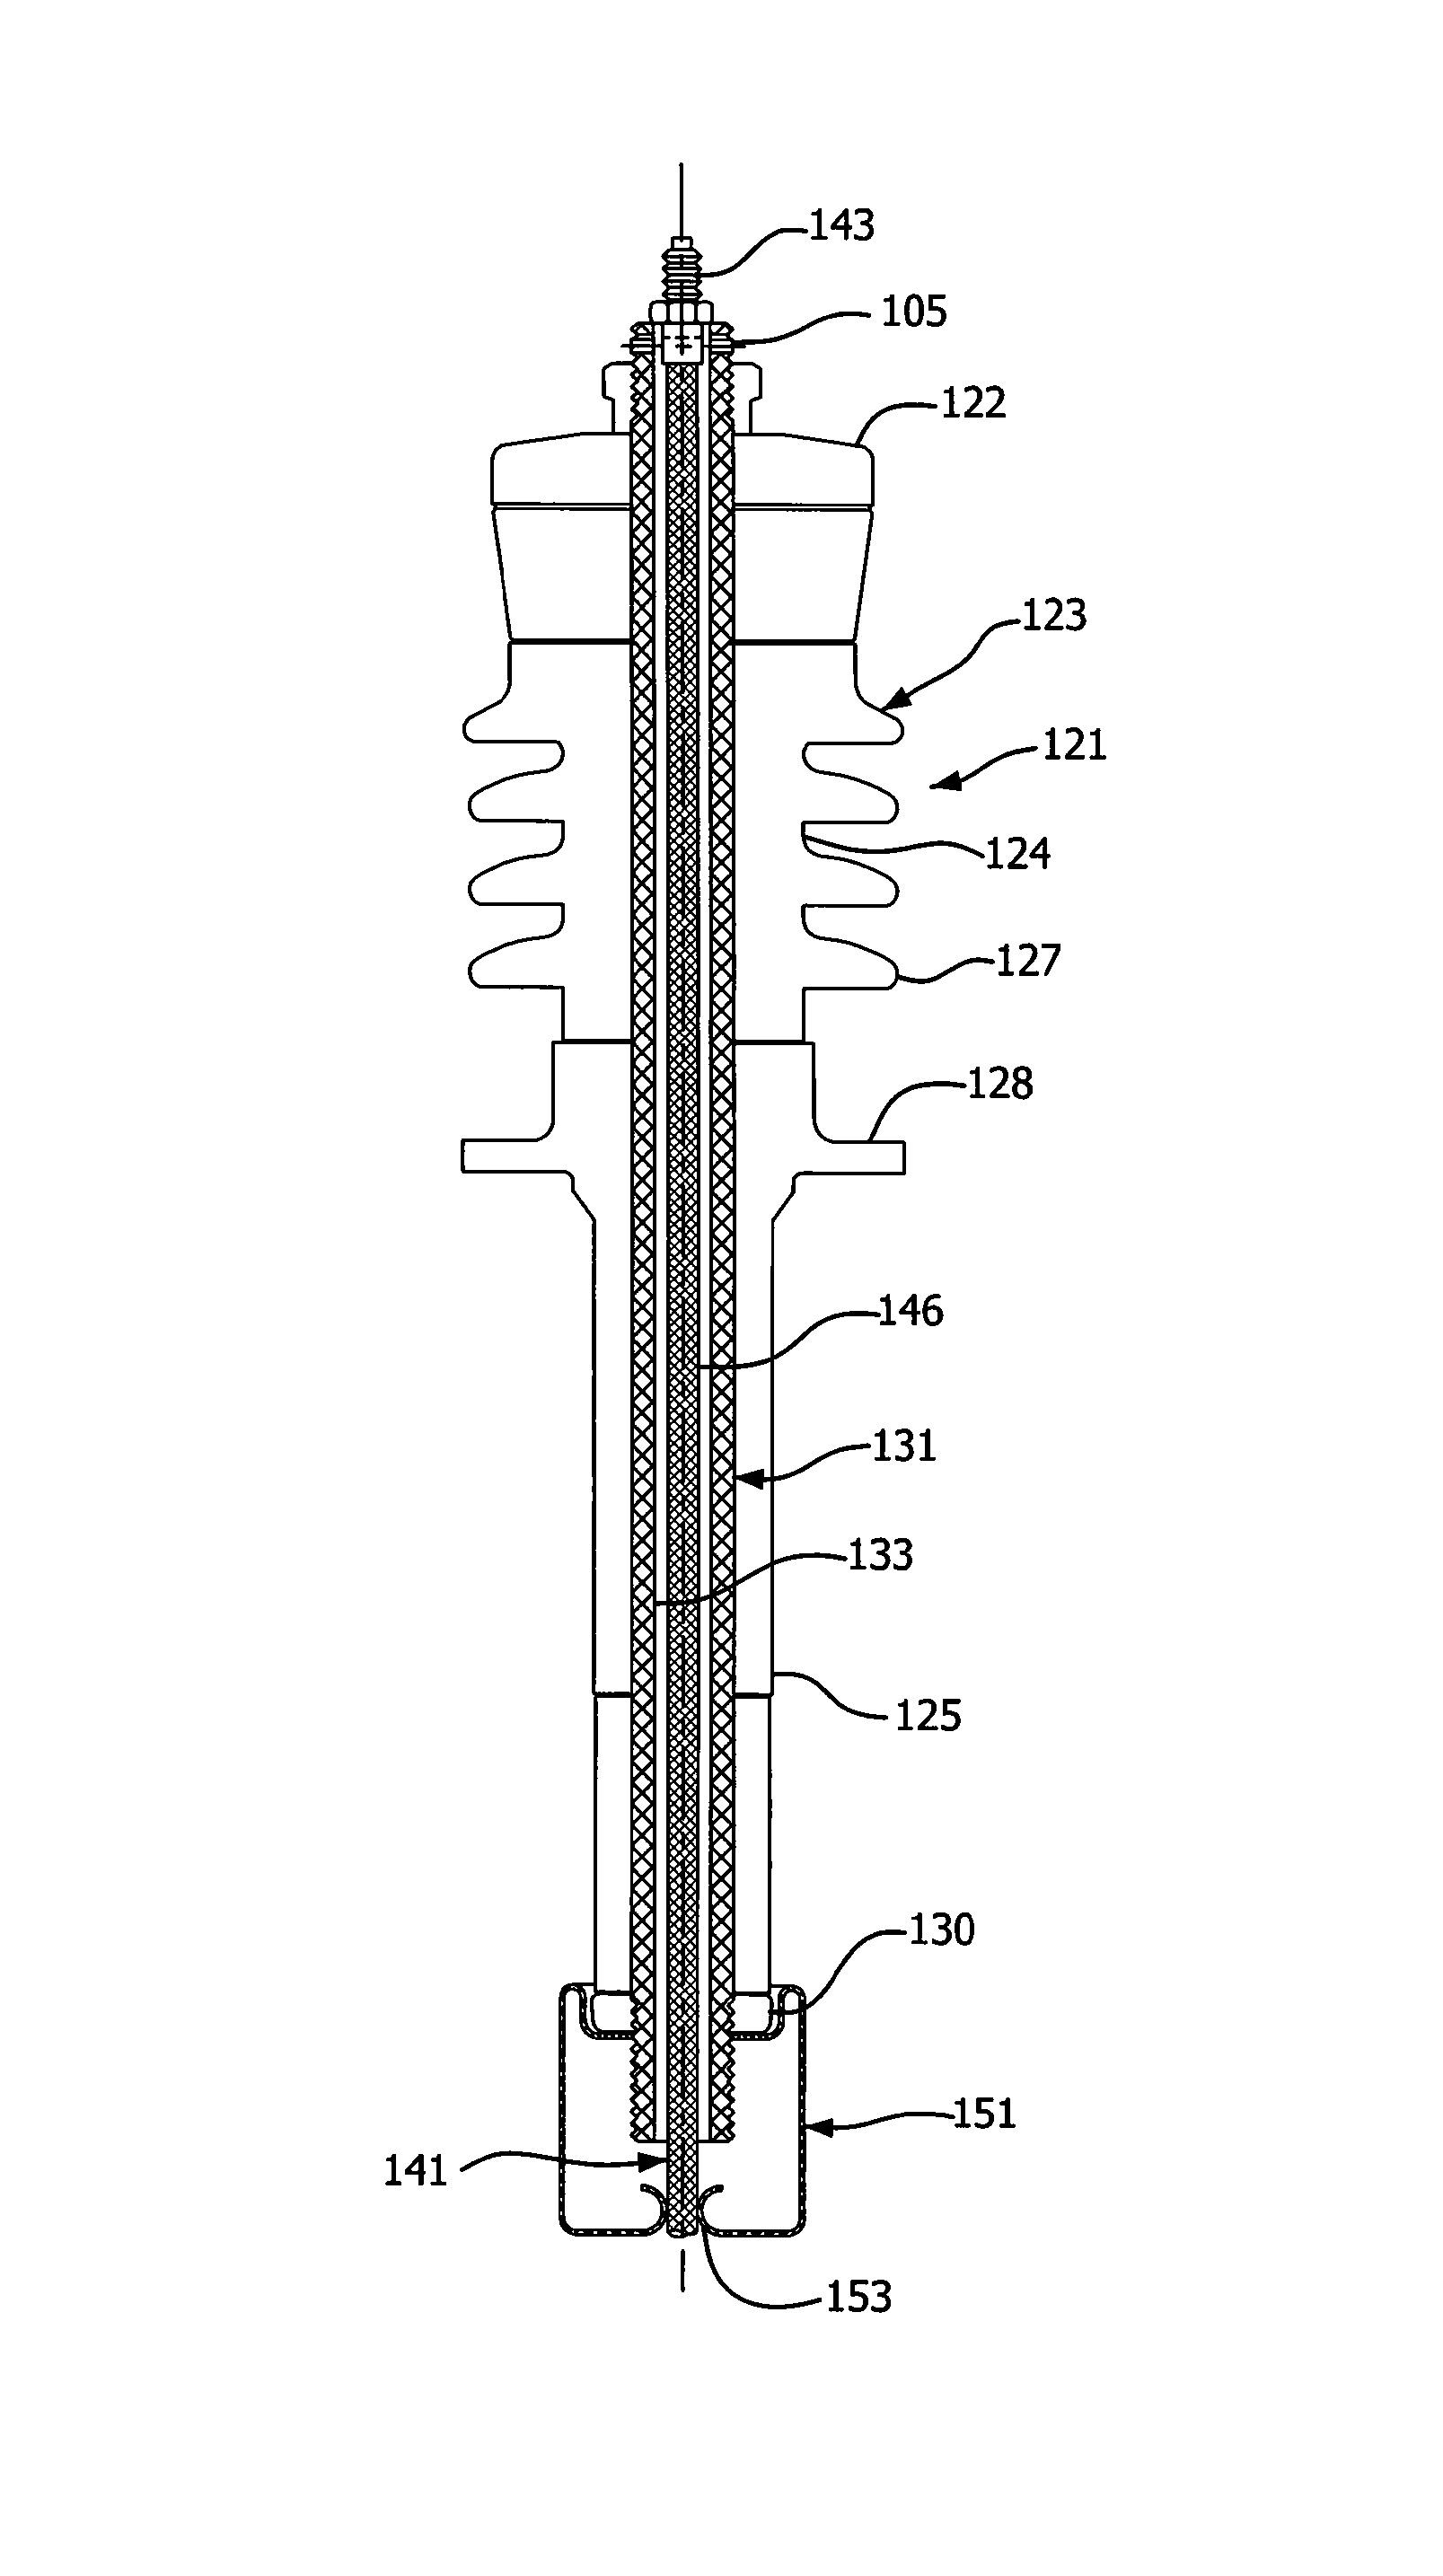 Spark-over prevention device for high-voltage bushing